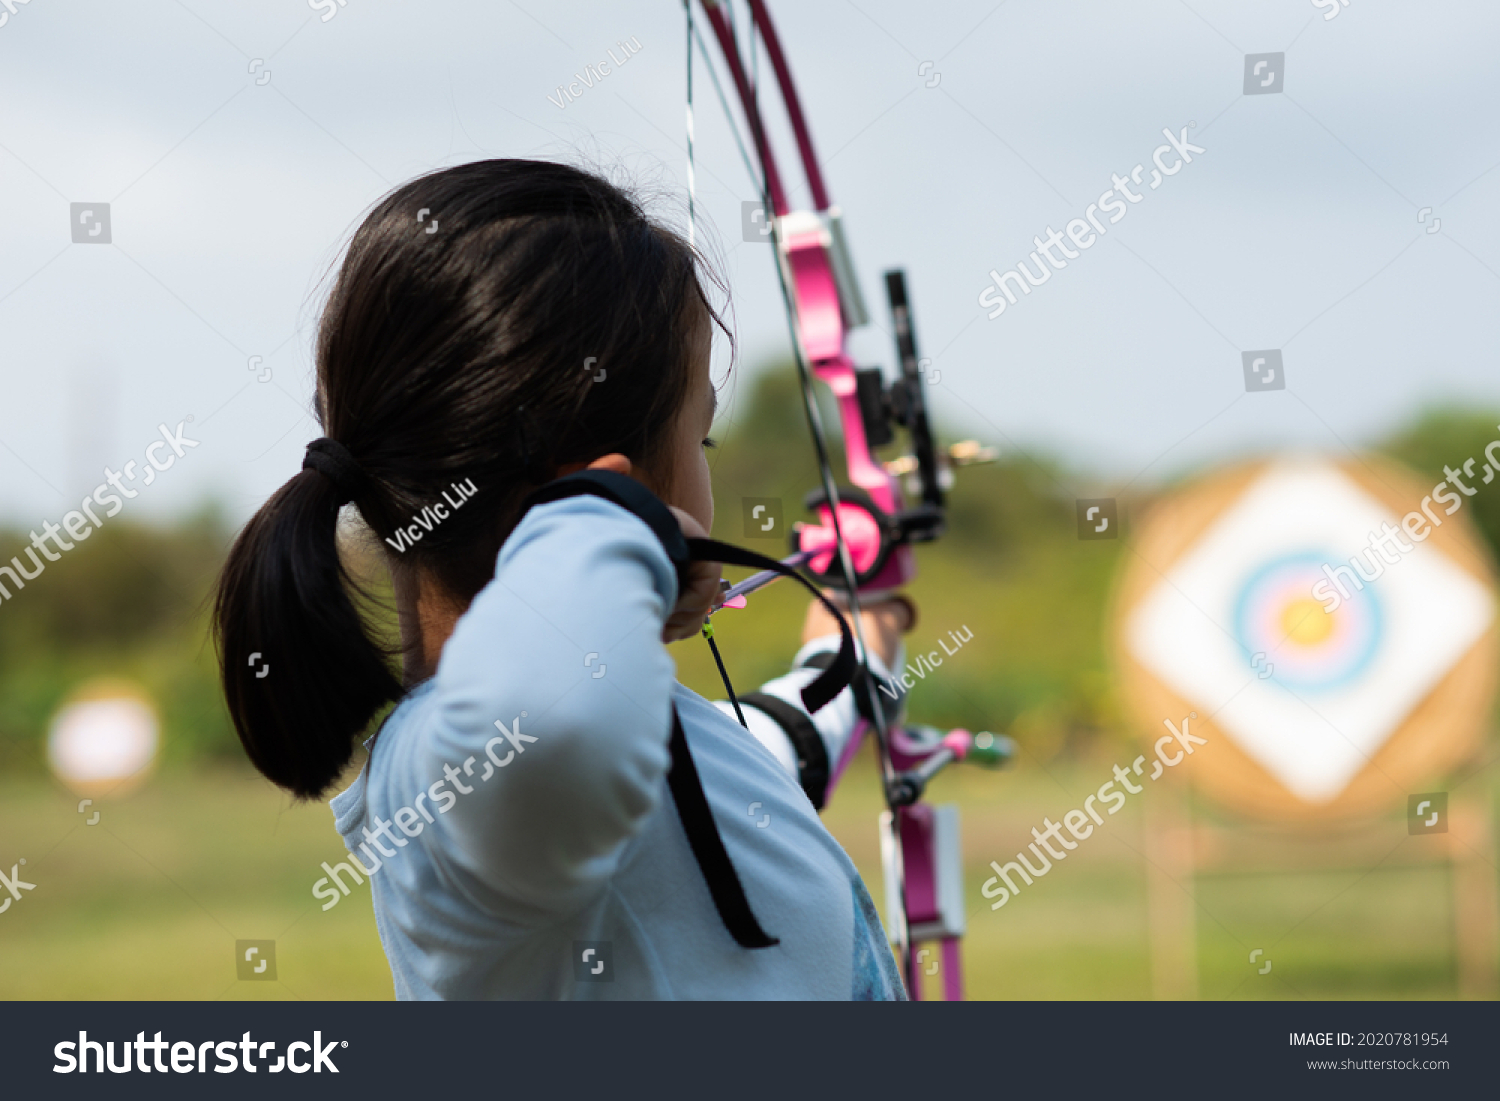 Children  learn compound bows in archery lessons. #2020781954